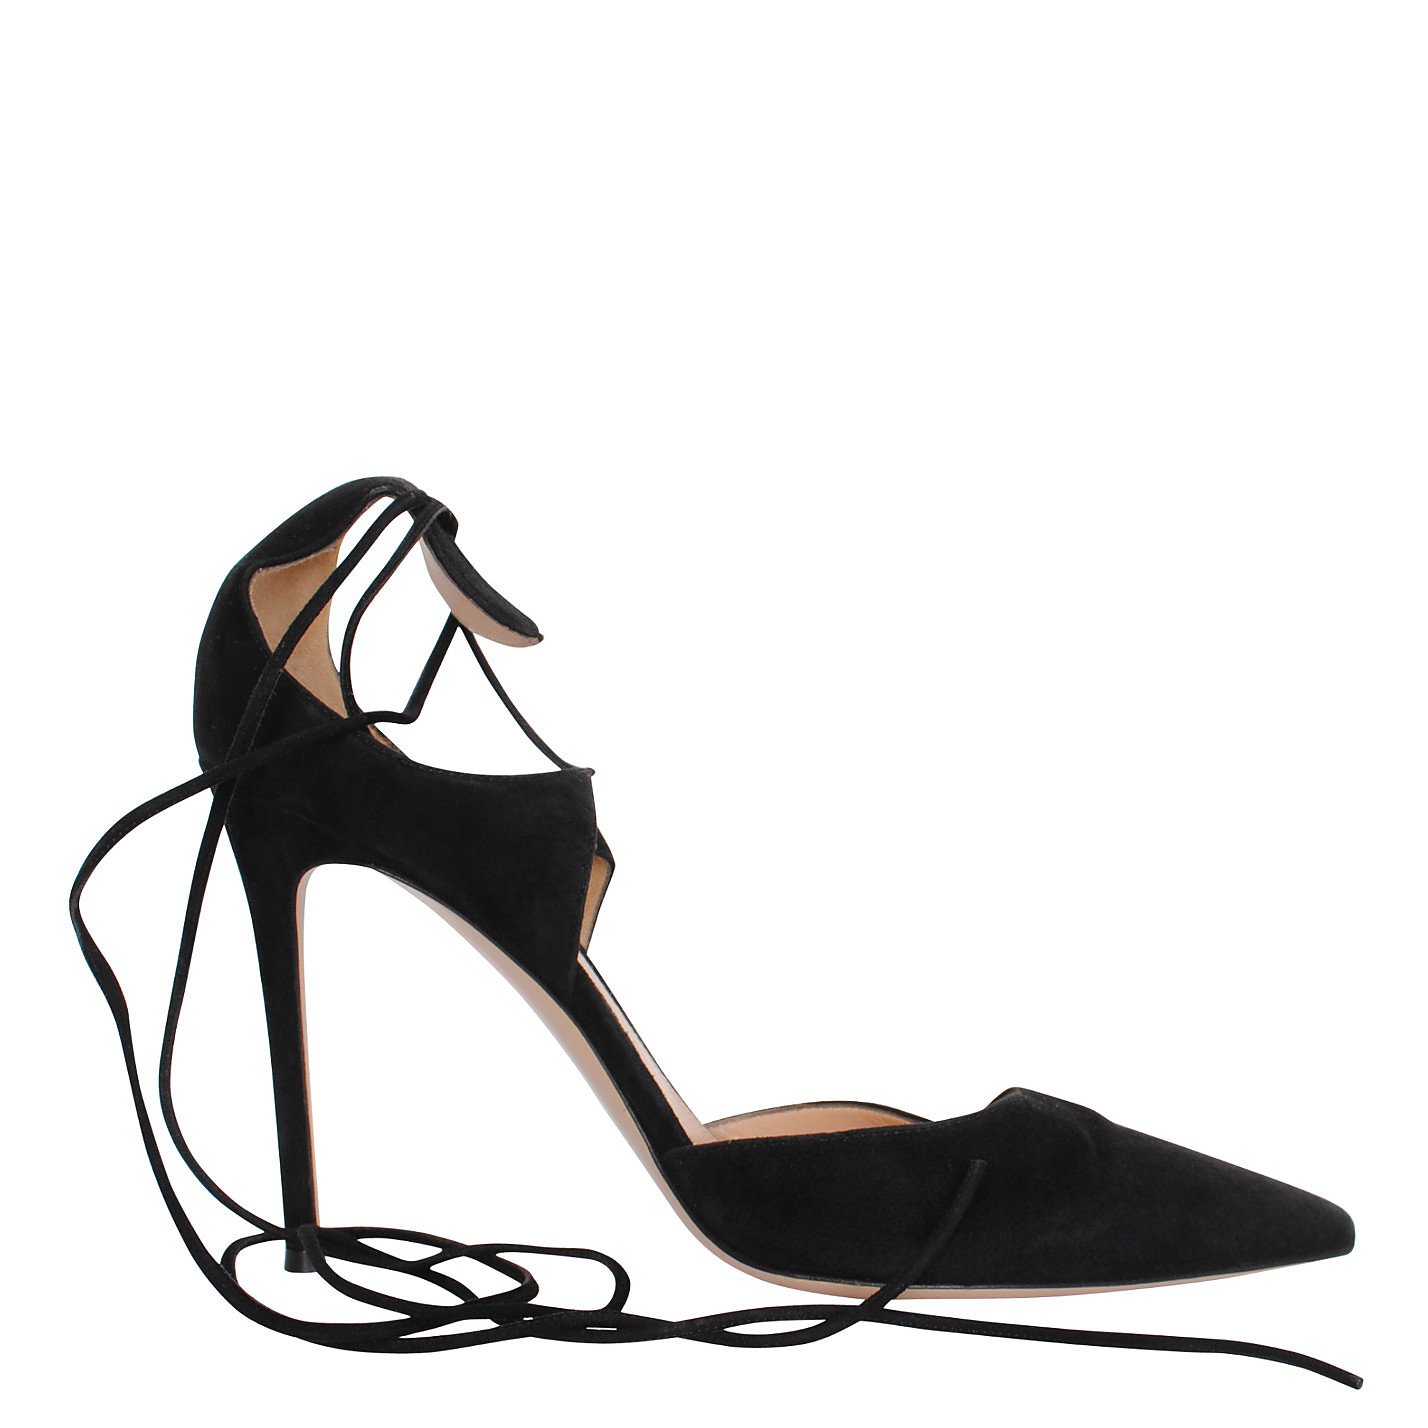 GIANVITO ROSSI Suede Ankle-Wrap Pumps